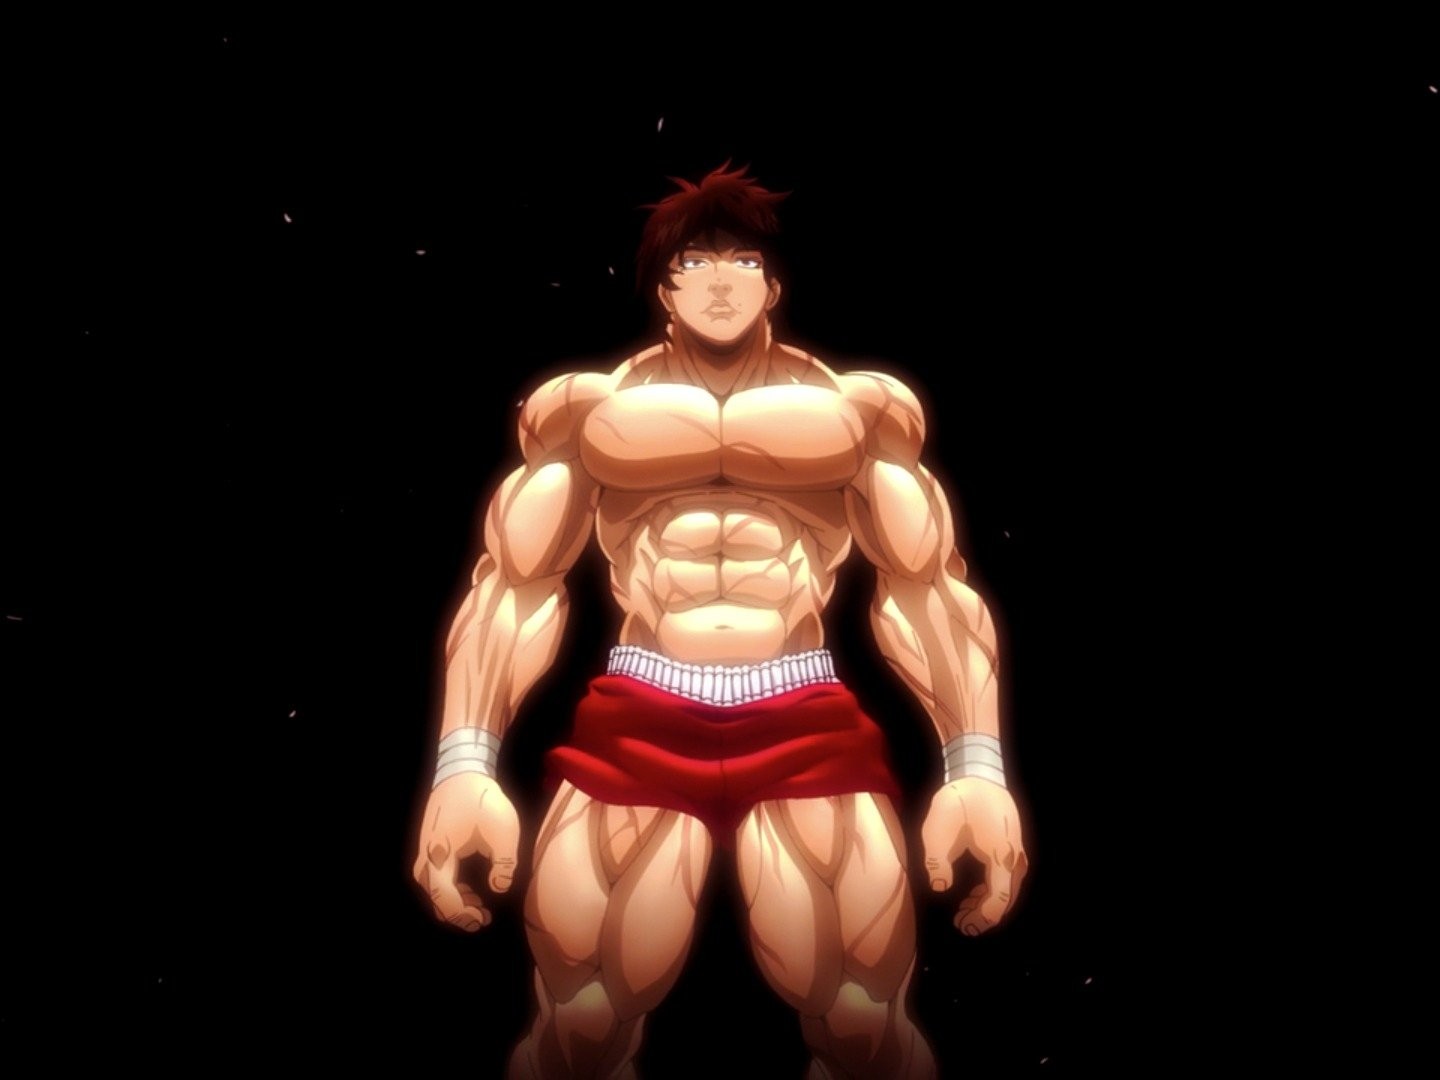 Here's where and how to watch Baki the Grappler in 2022 